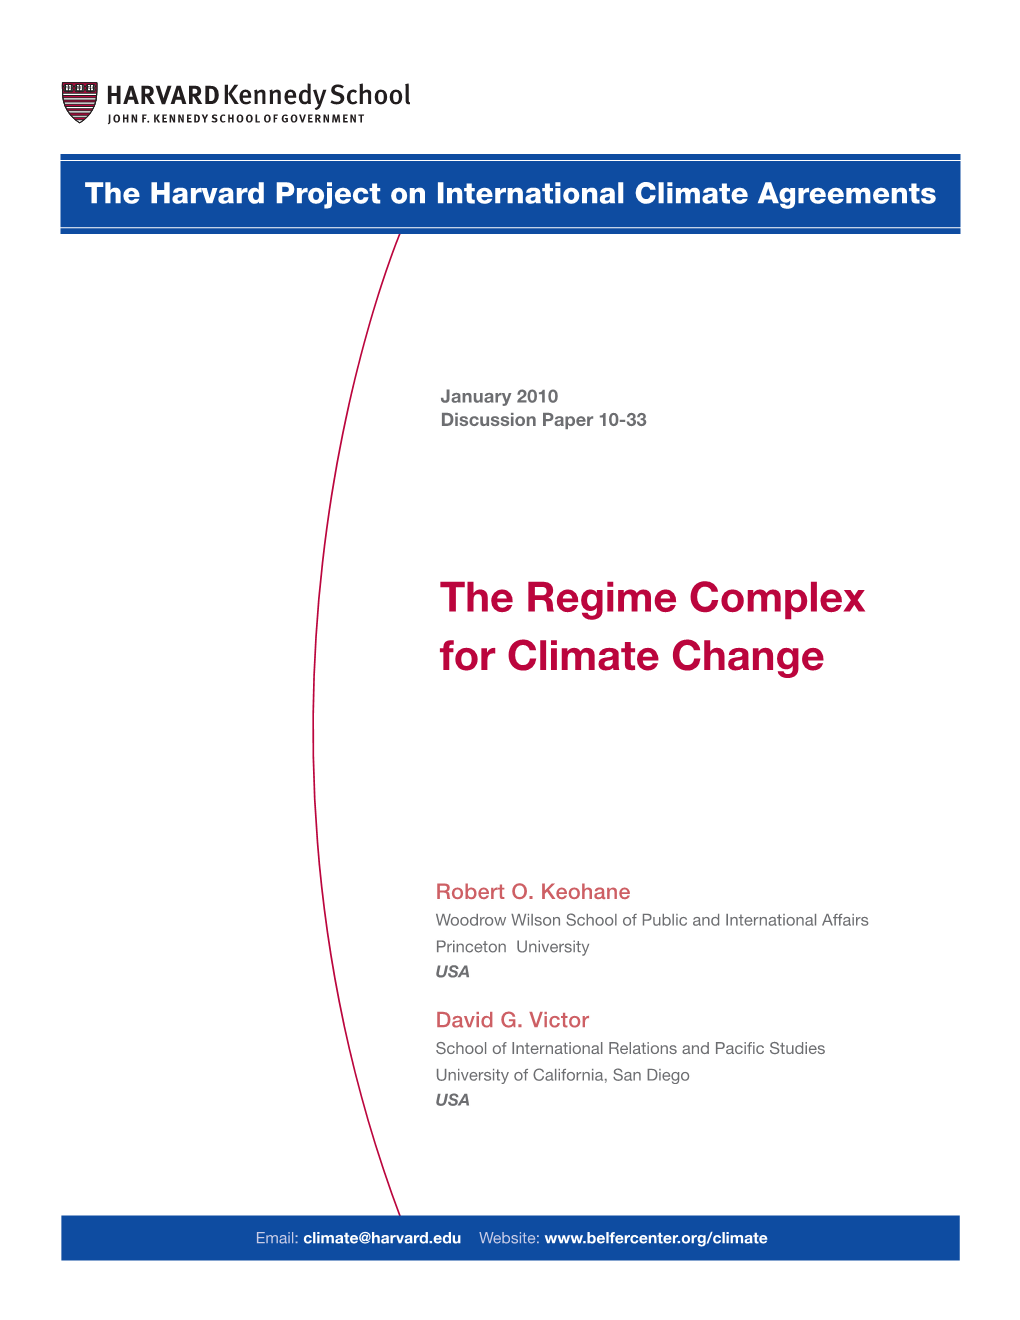 The Regime Complex for Climate Change